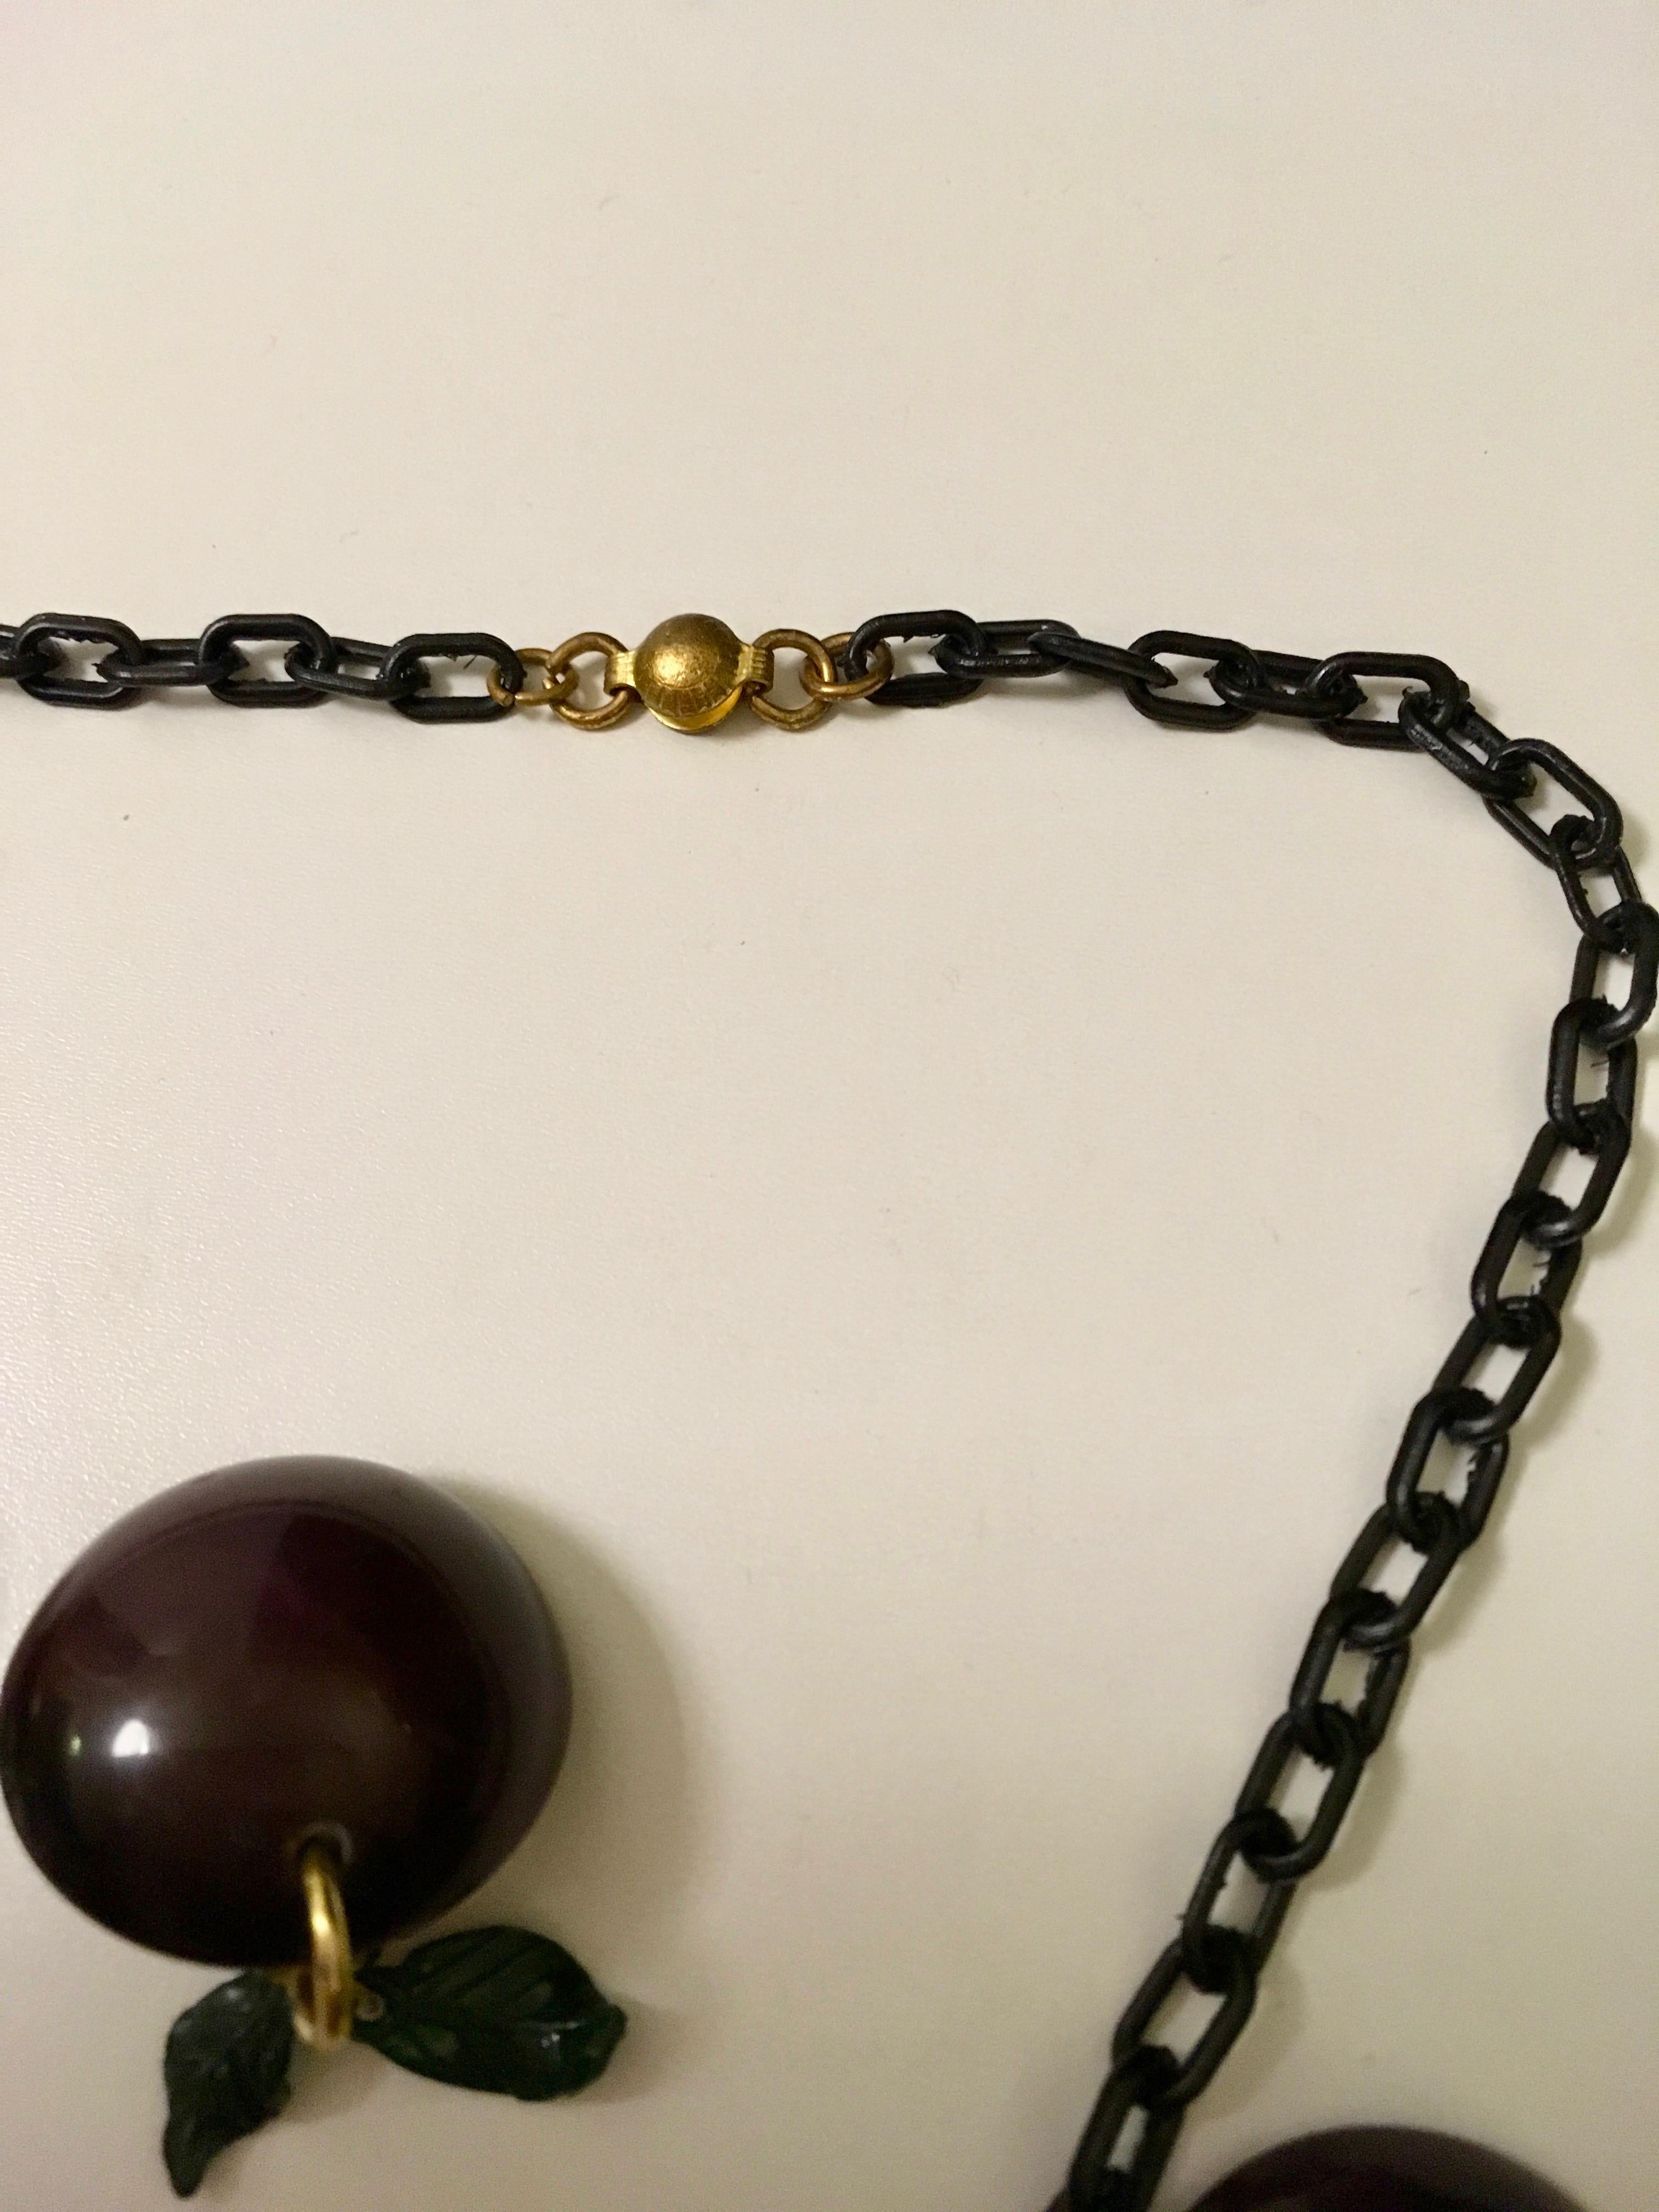  Bakelite Necklace Grape with Matching Earrings Jan Carlin For Sale 1